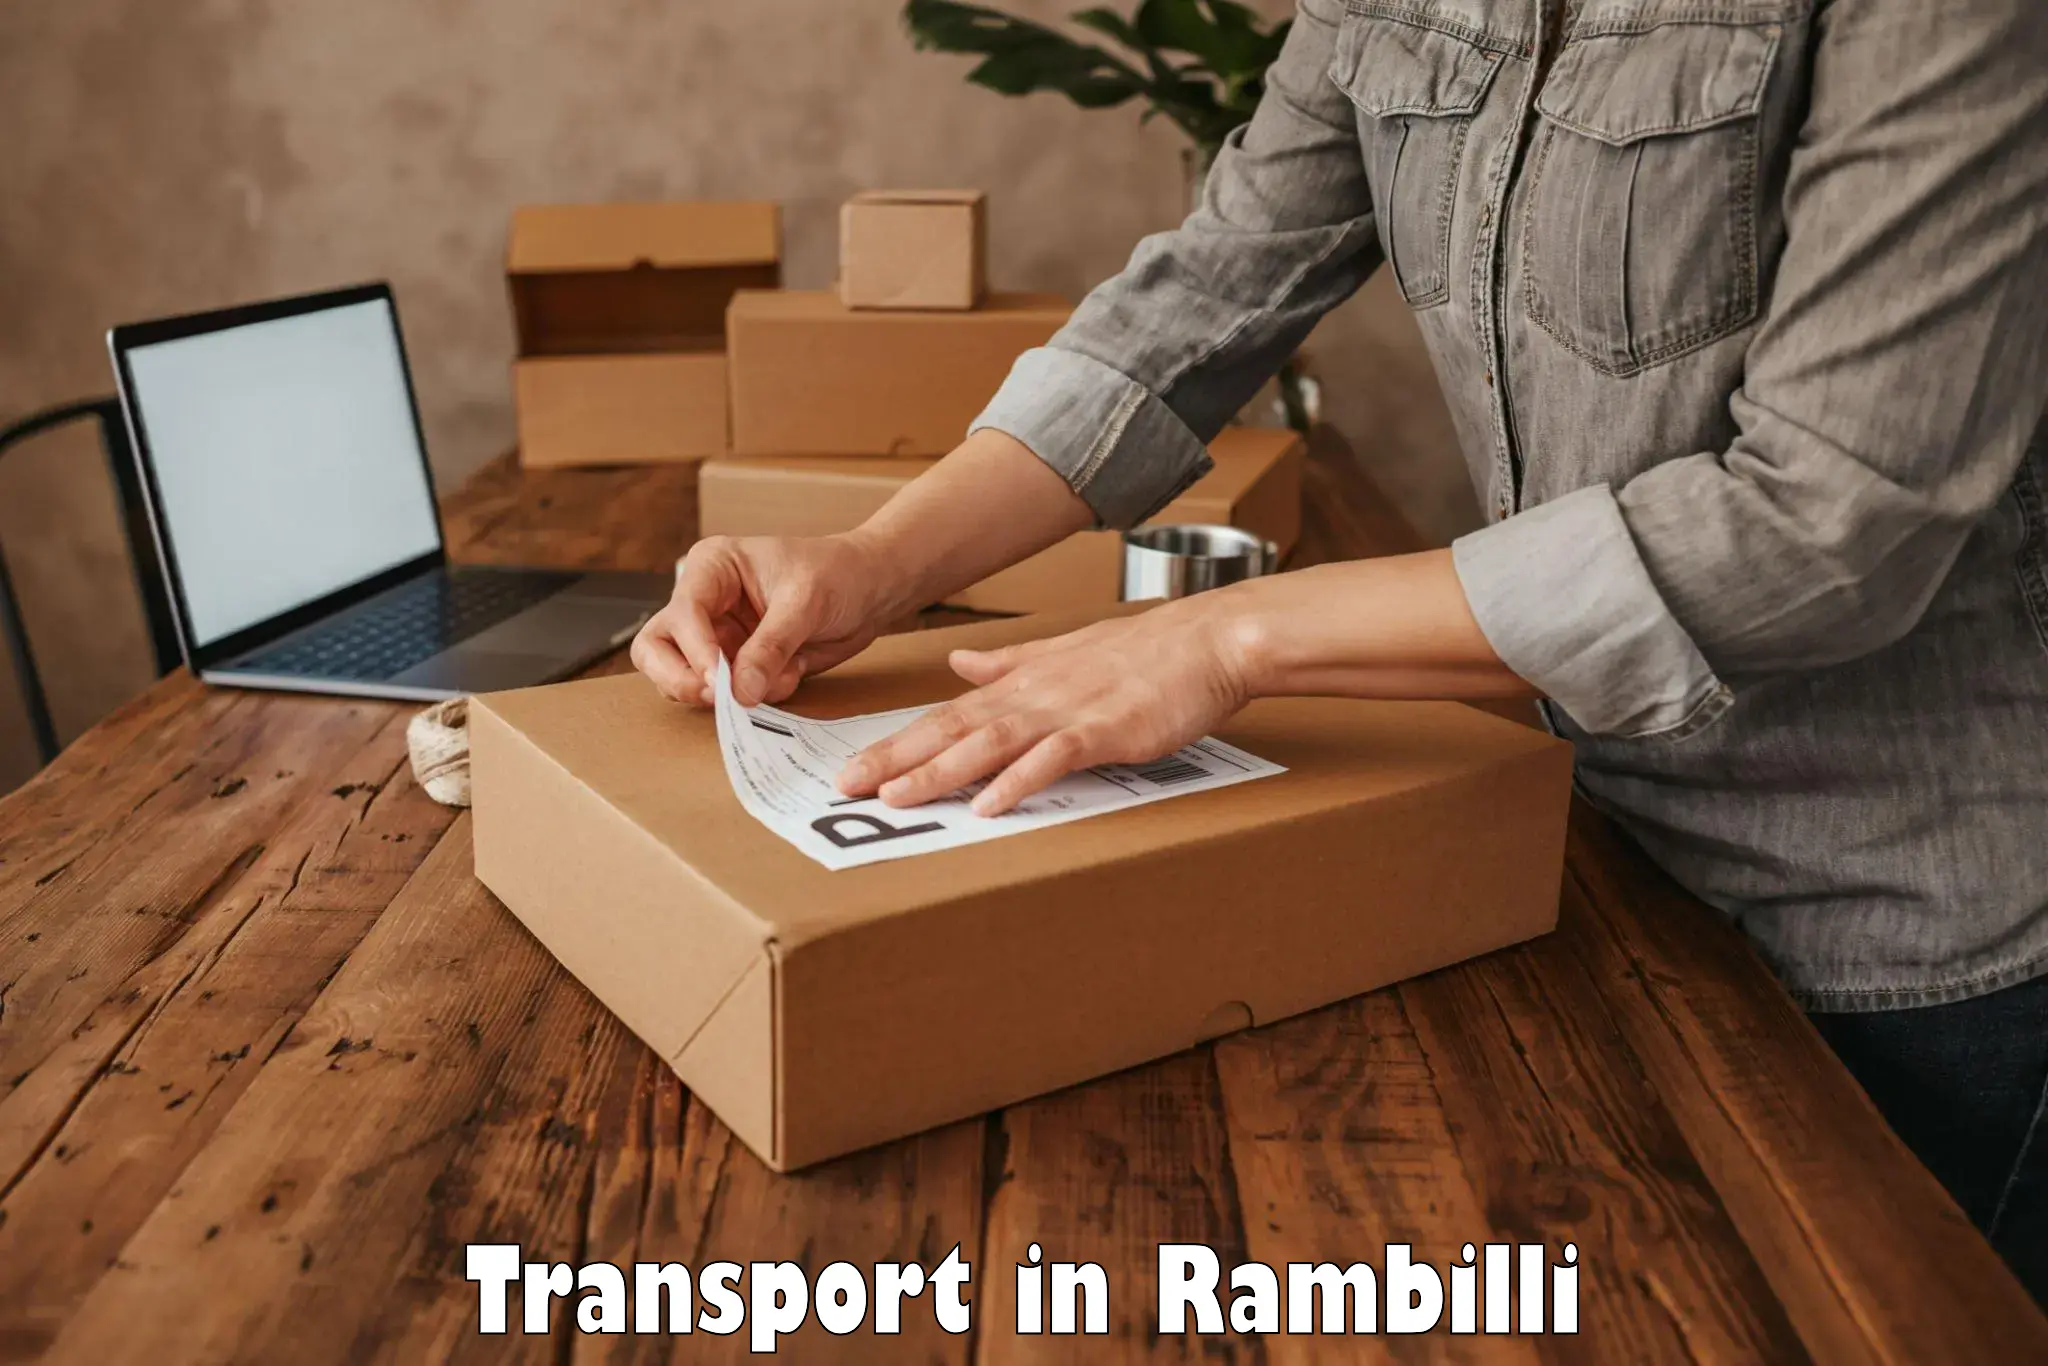 Transport bike from one state to another in Rambilli